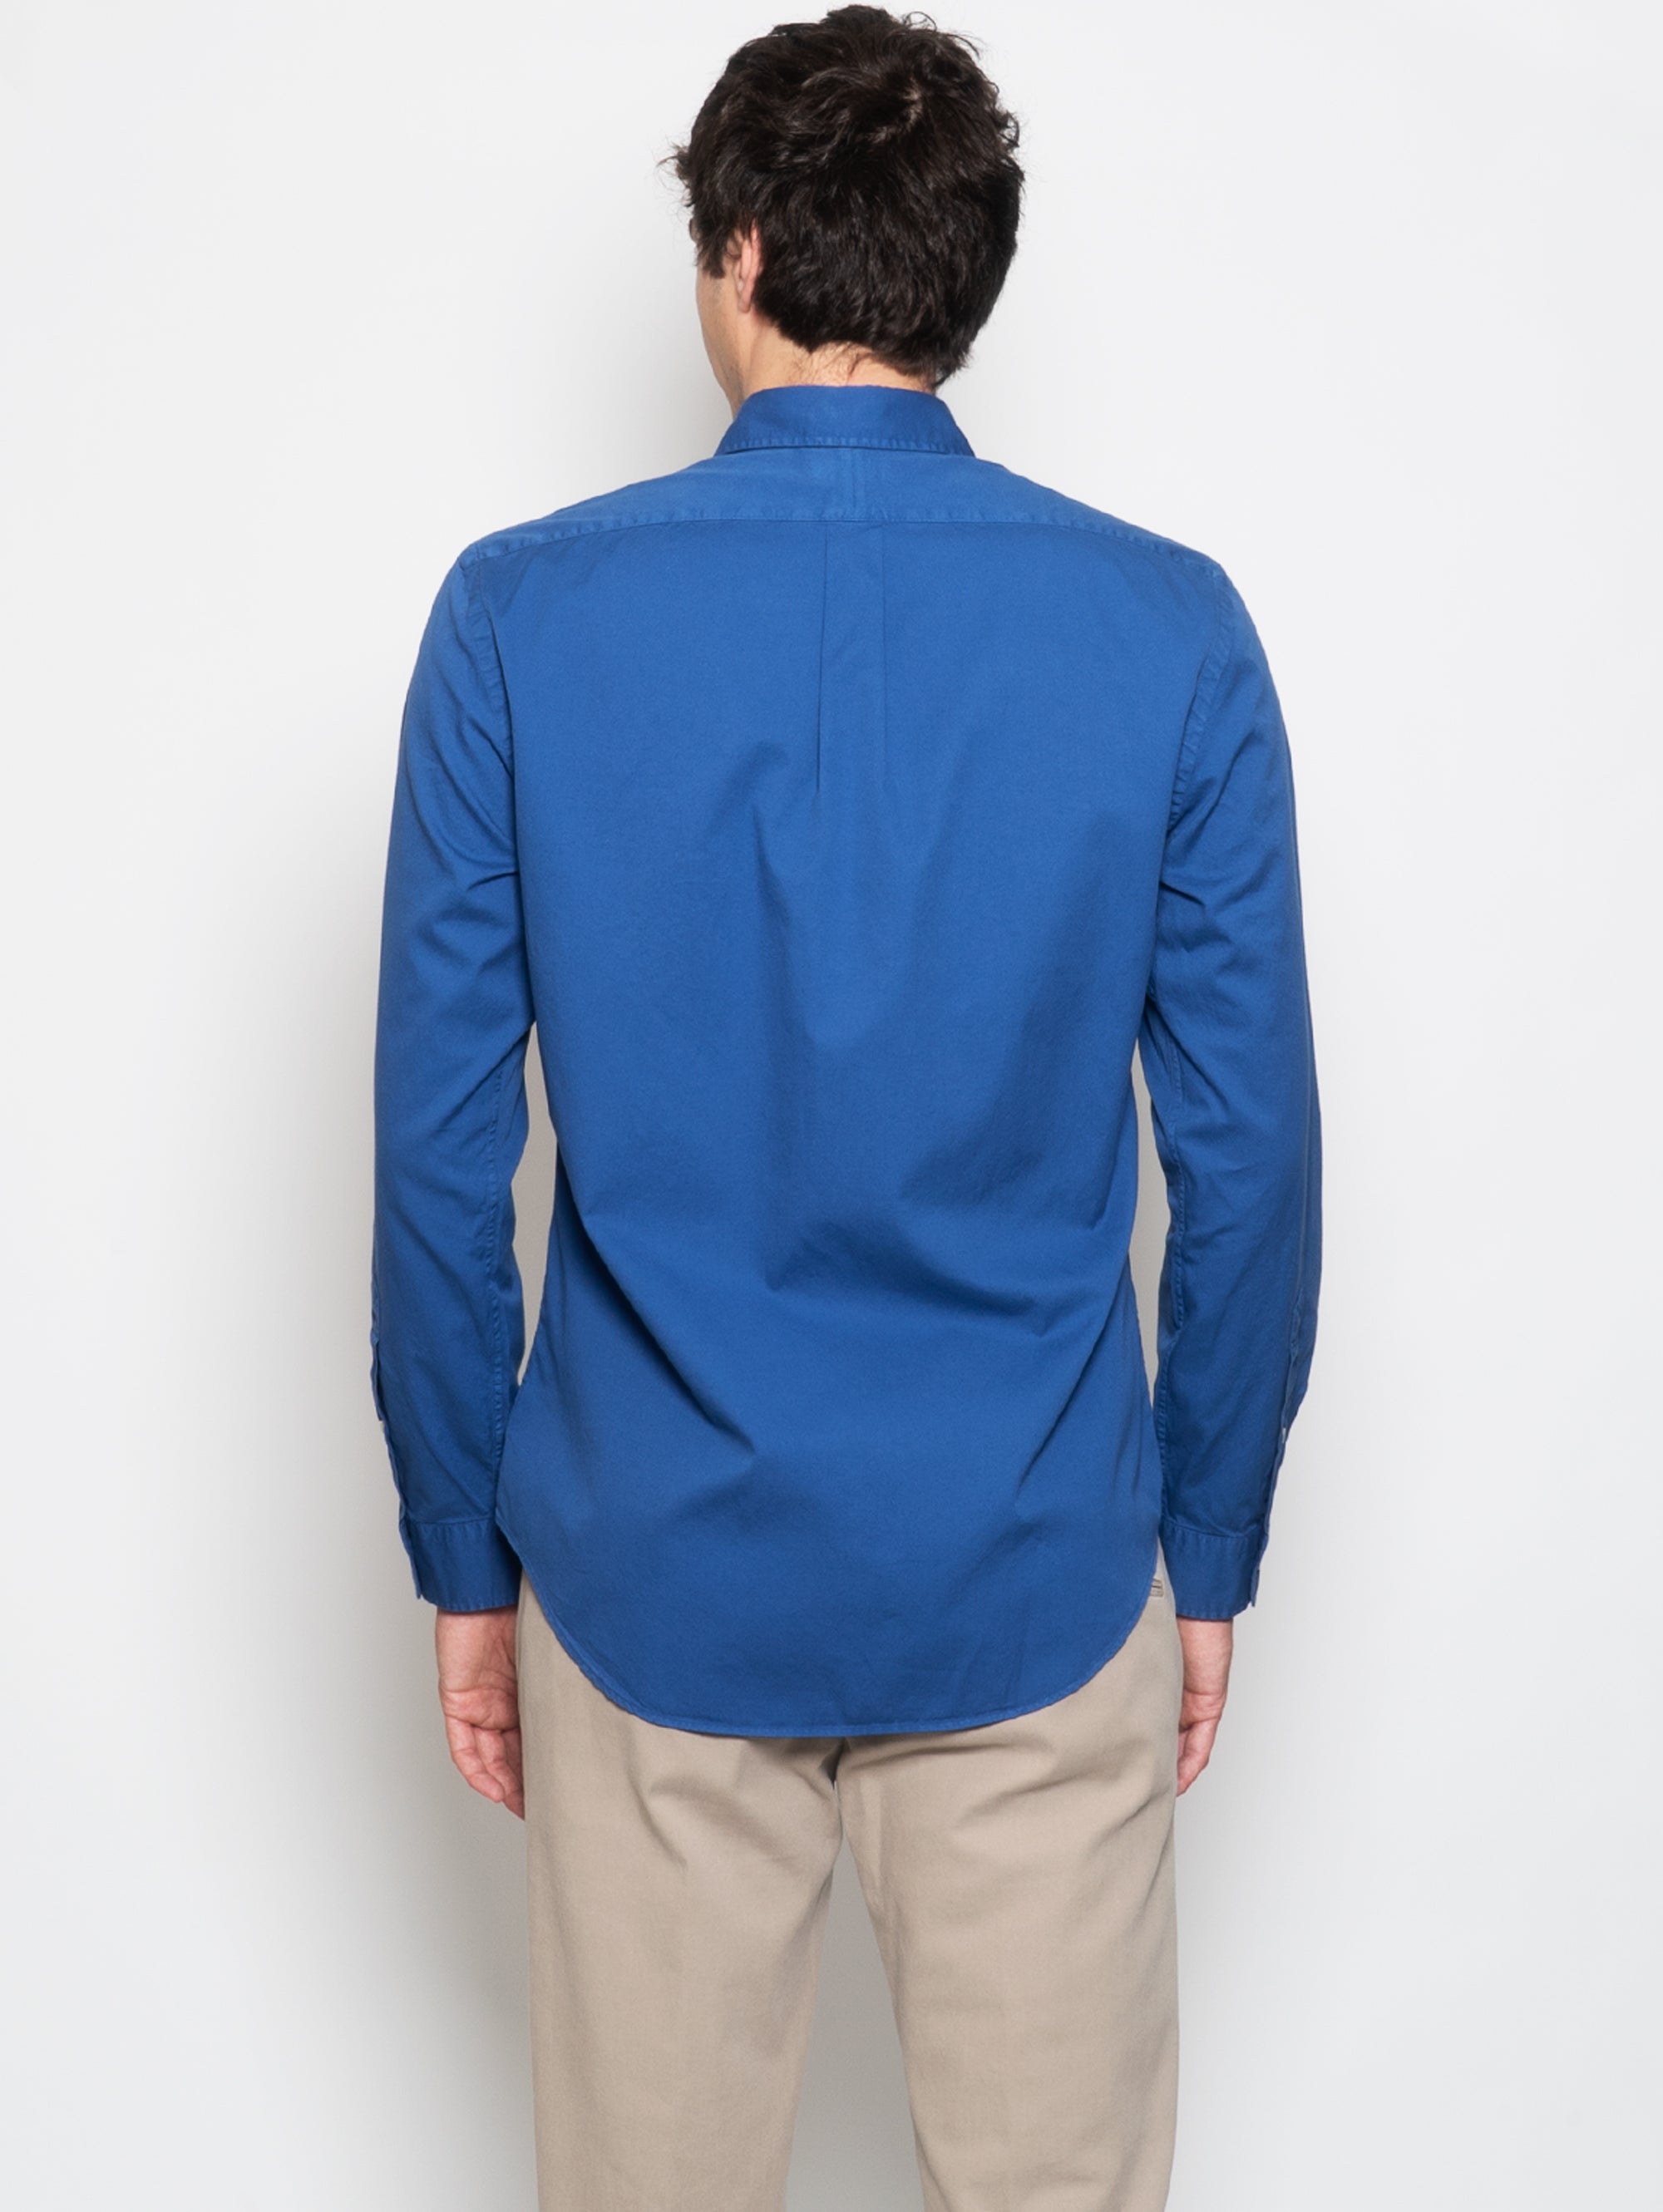 Slim Fit Shirt in Royal Blue Cotton Twill